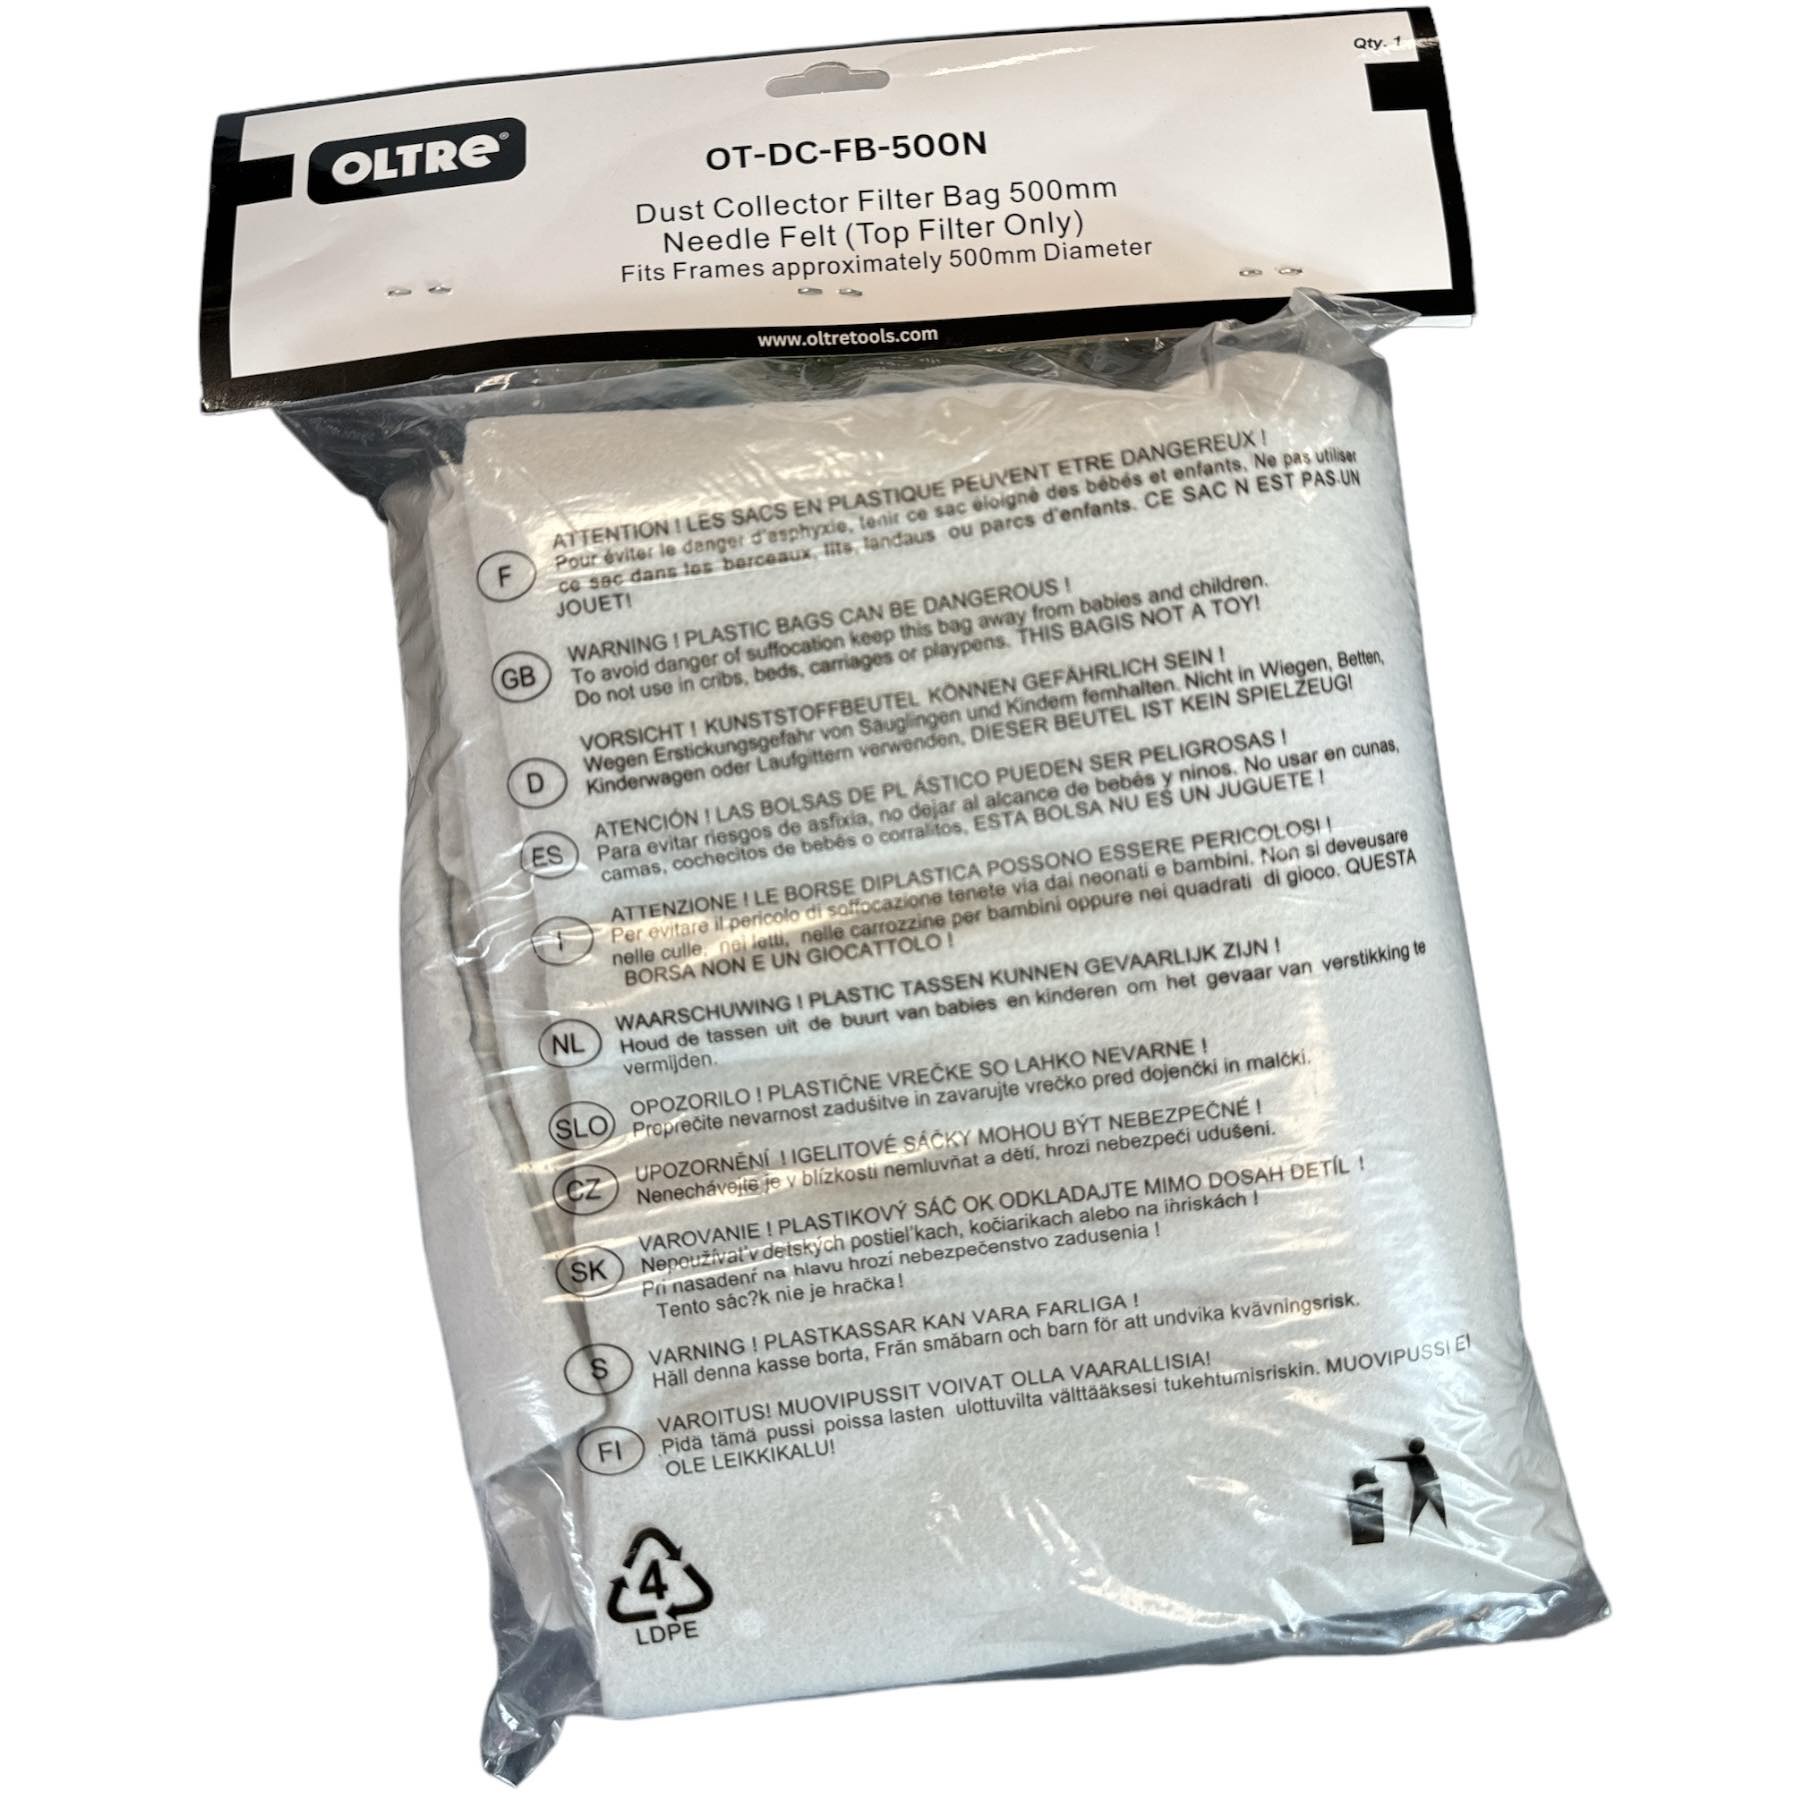 Dust Collector Filter Bag 500mm OT-DC-FB-500 by Oltre